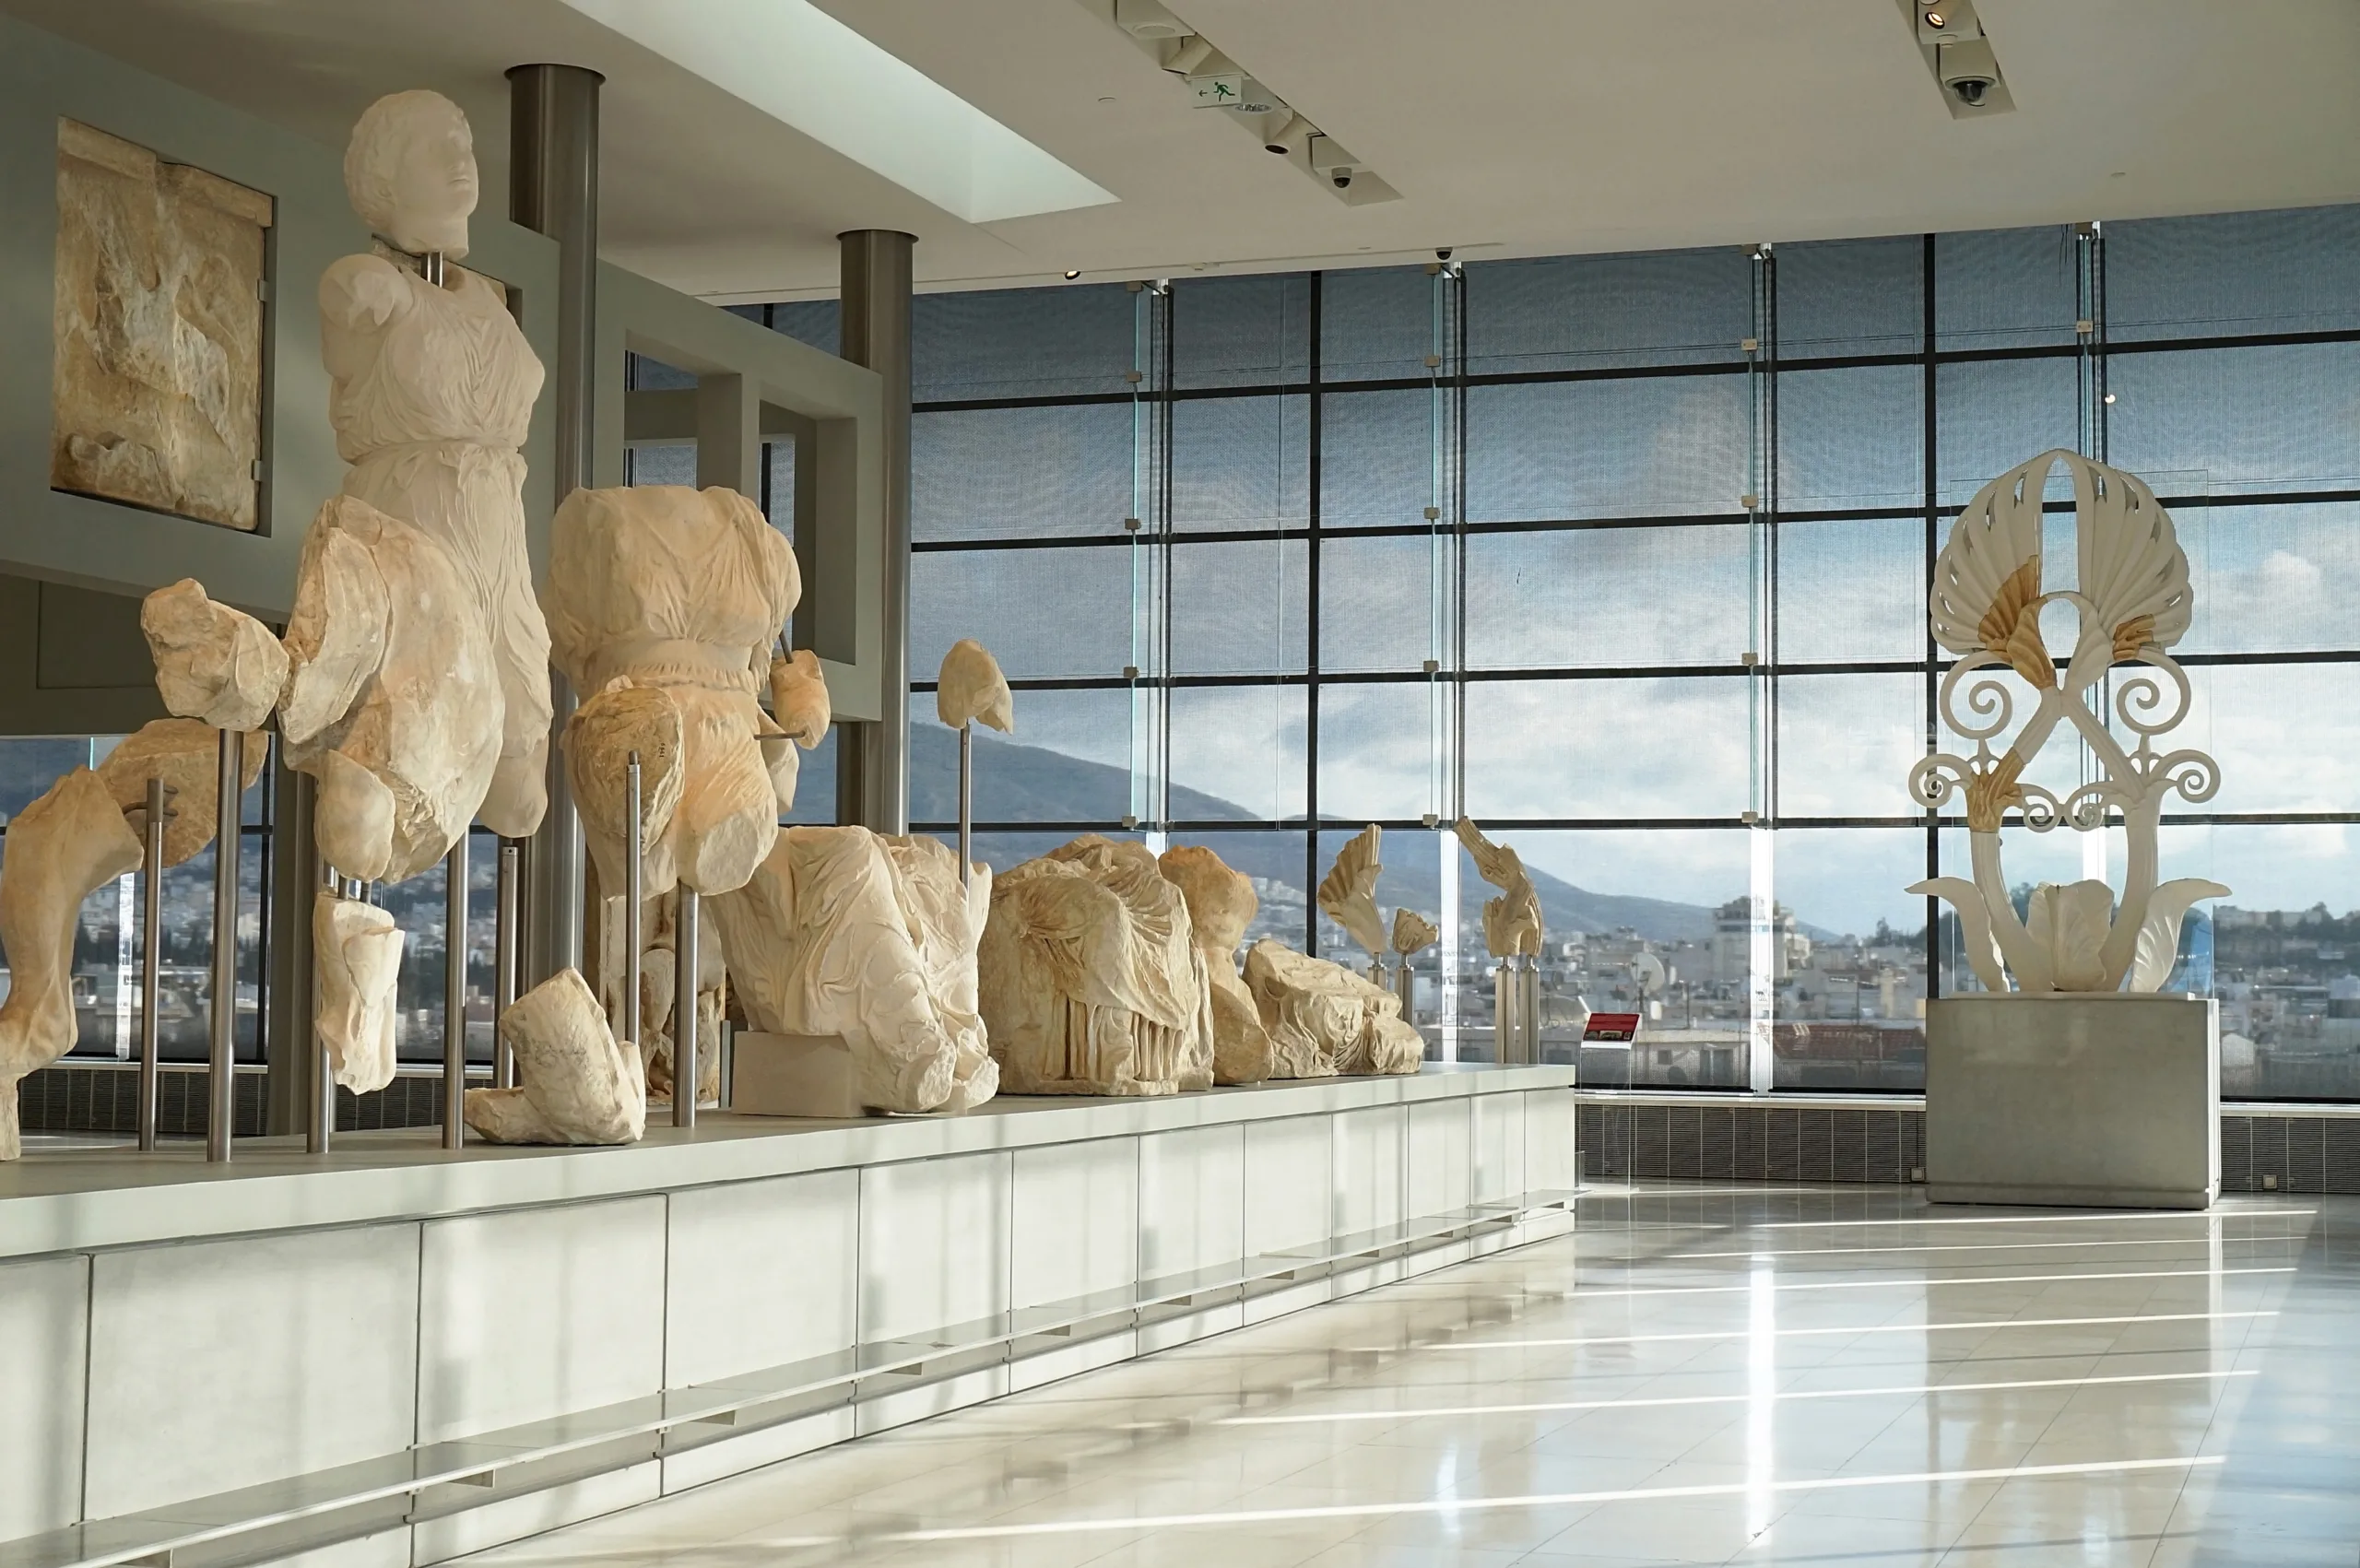 Interior of the new Acropolis museum